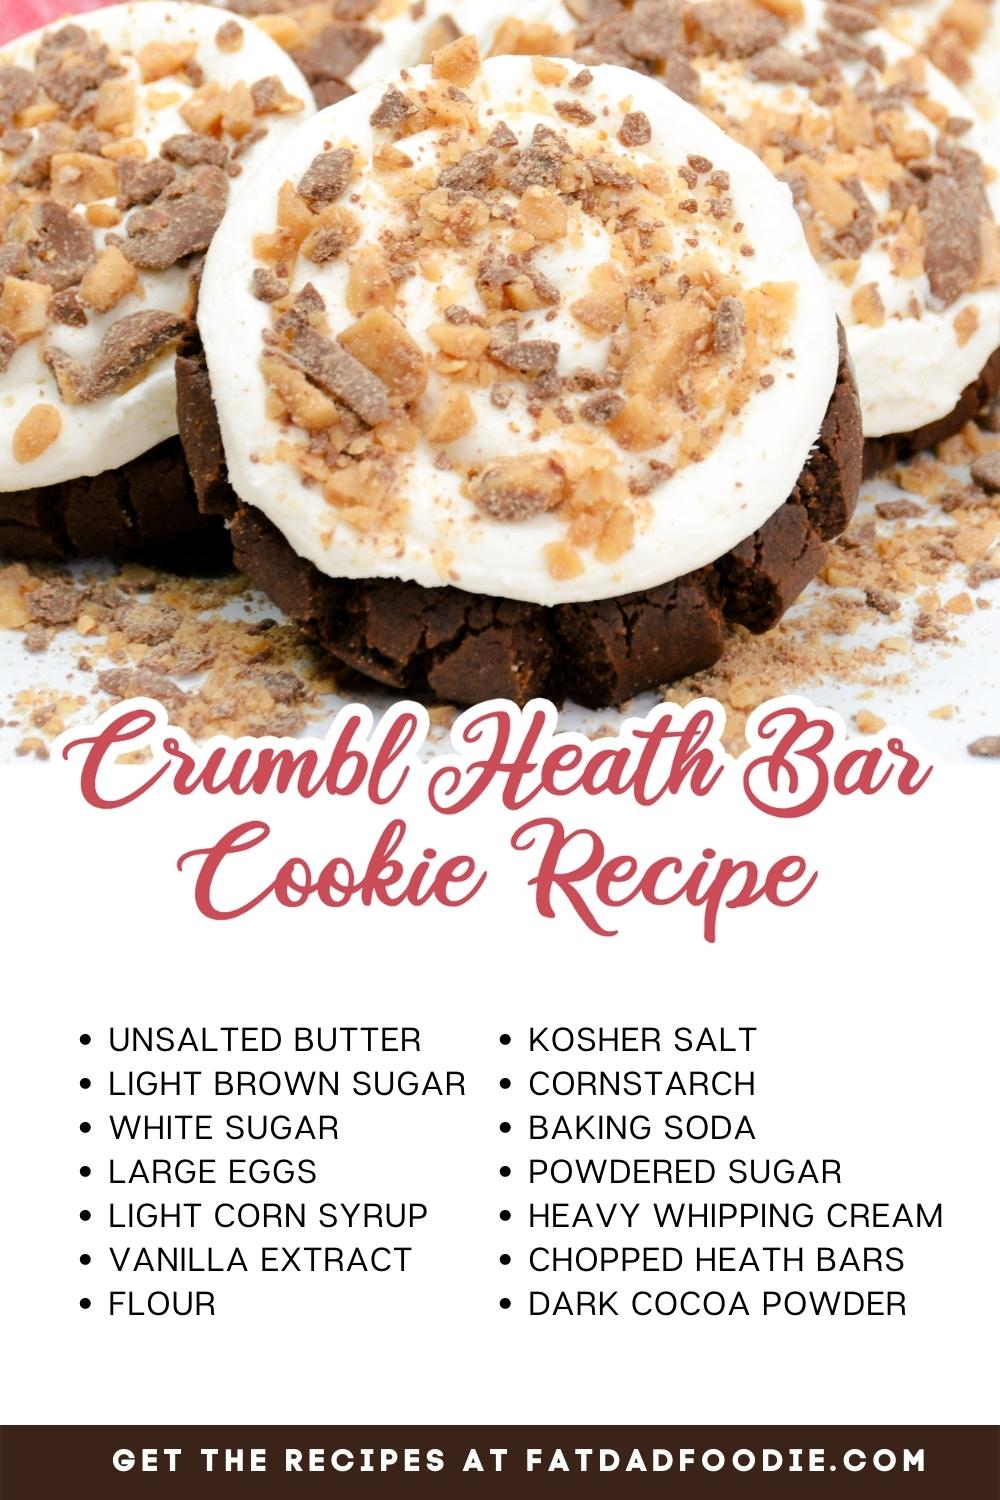 crumbl heath bar cookie recipe with ingredients